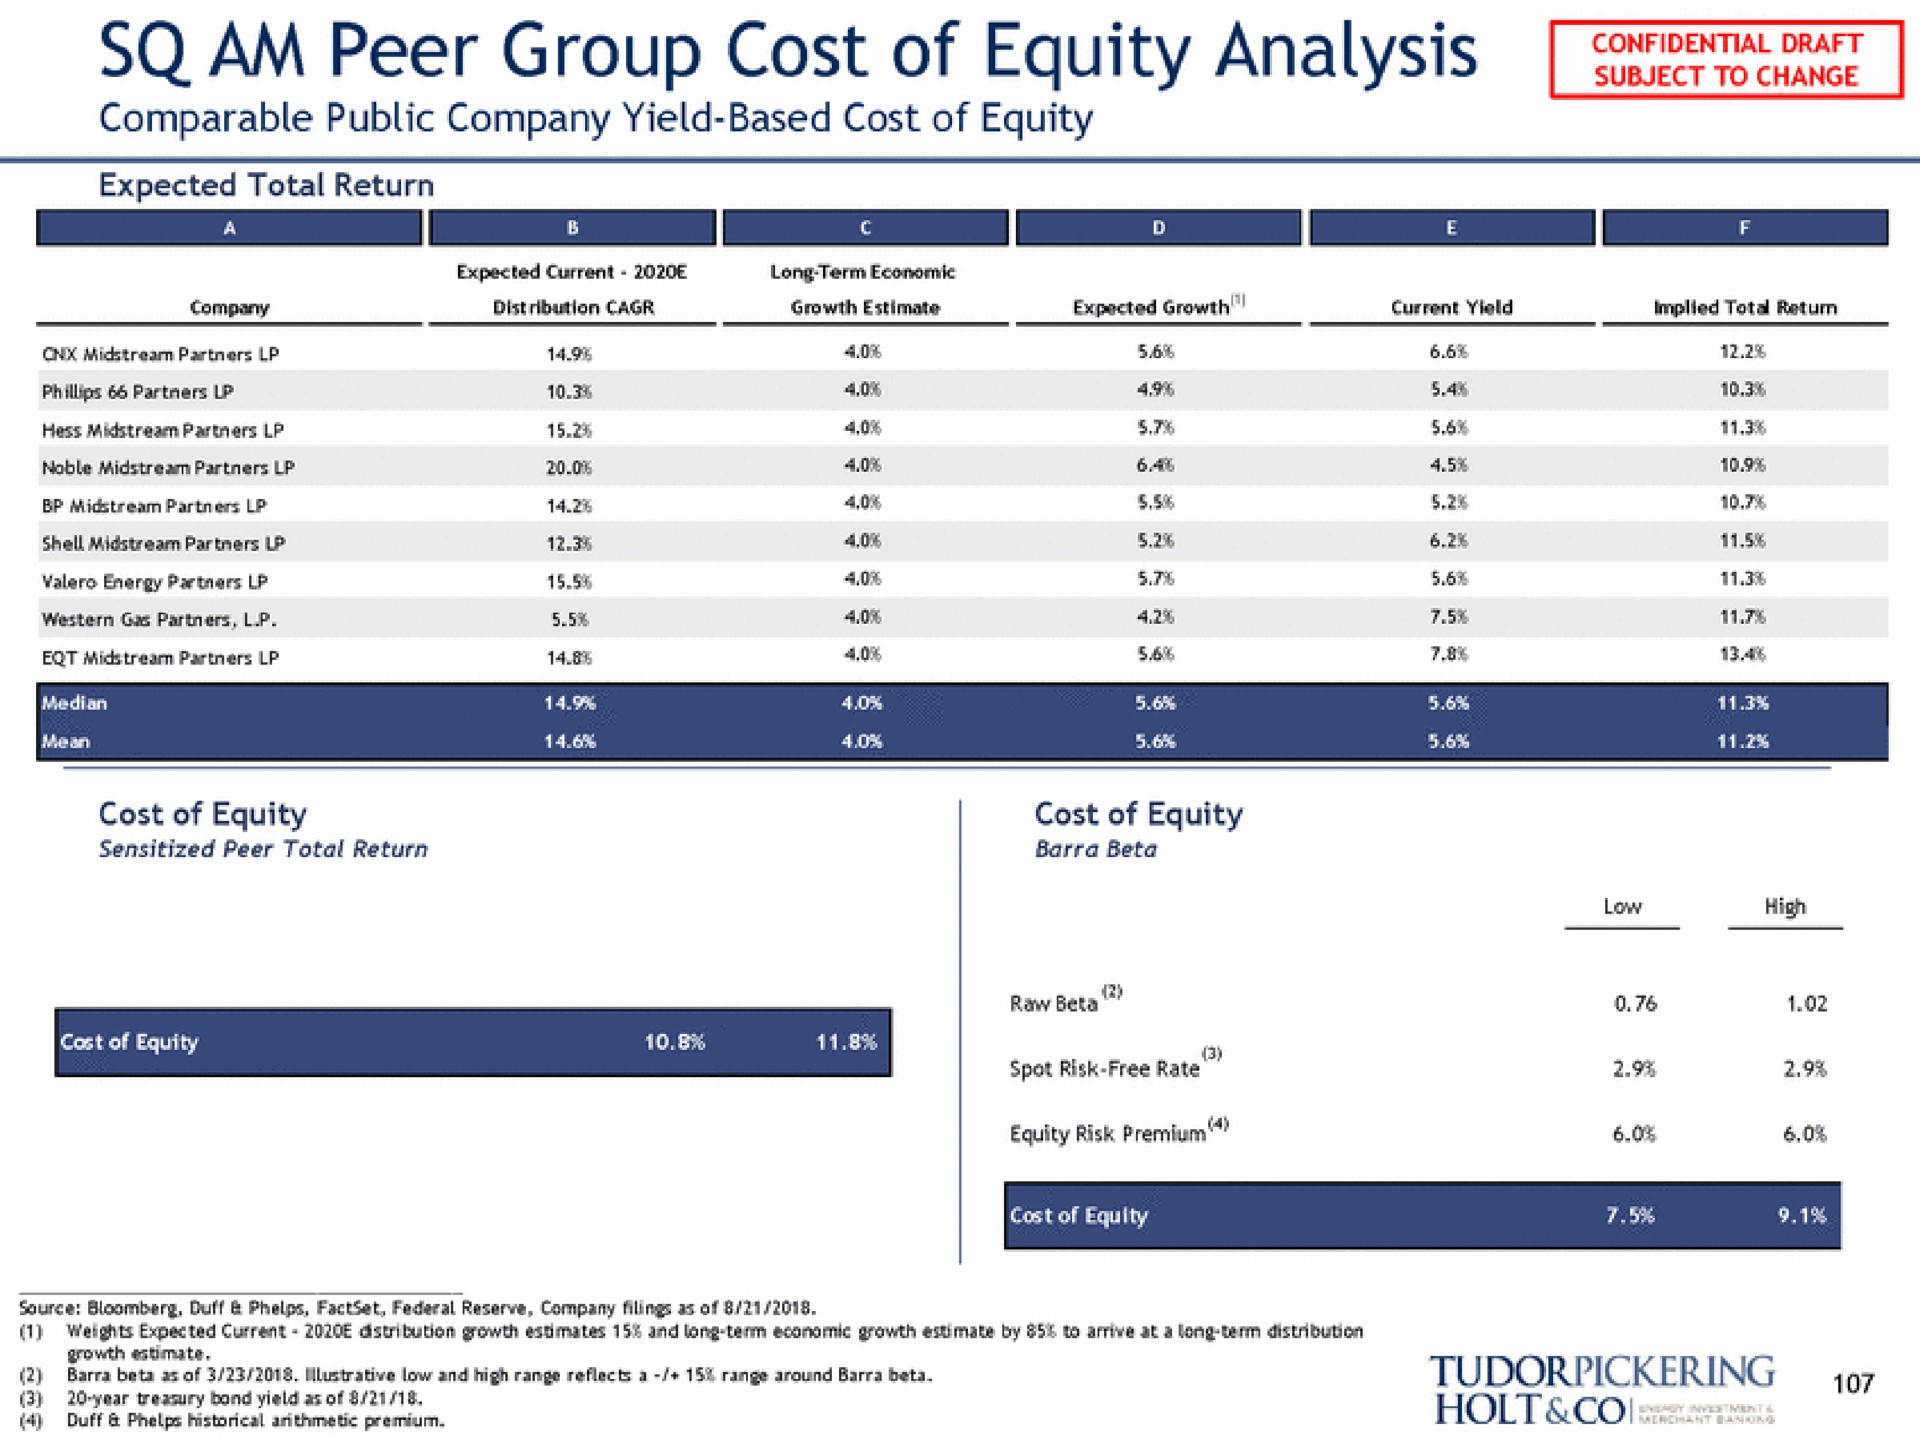 am peer group cost of equity analysis | Tudor, Pickering, Holt & Co